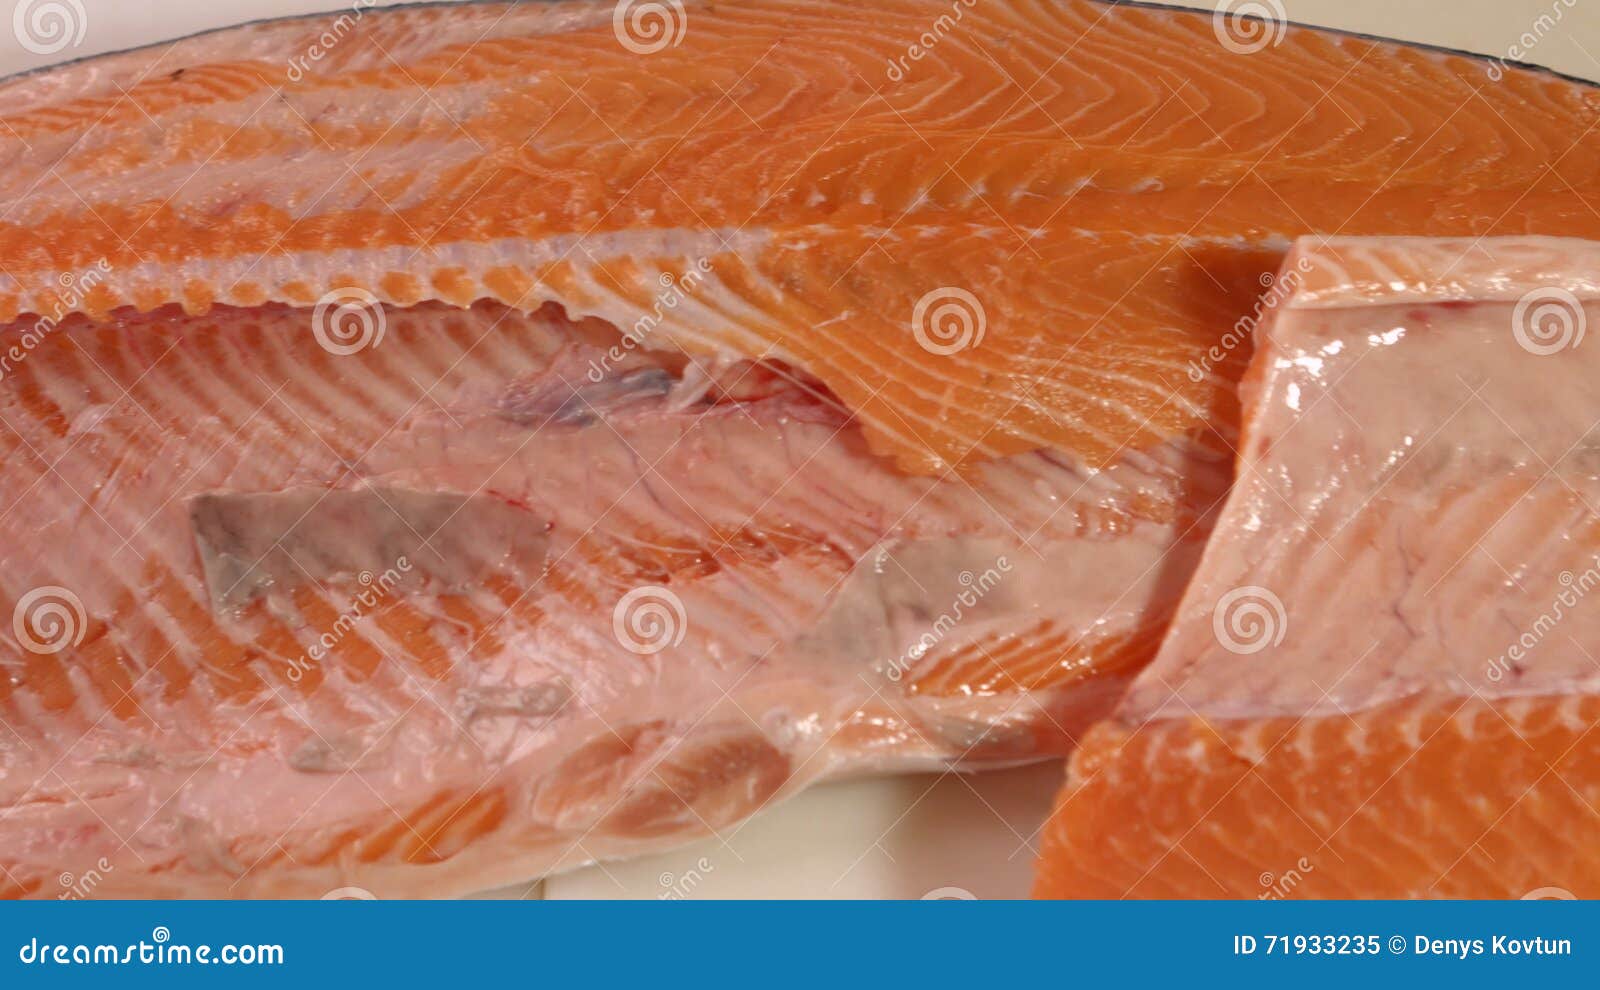 Raw fish with red meat. stock video. Video of animal - 71933235